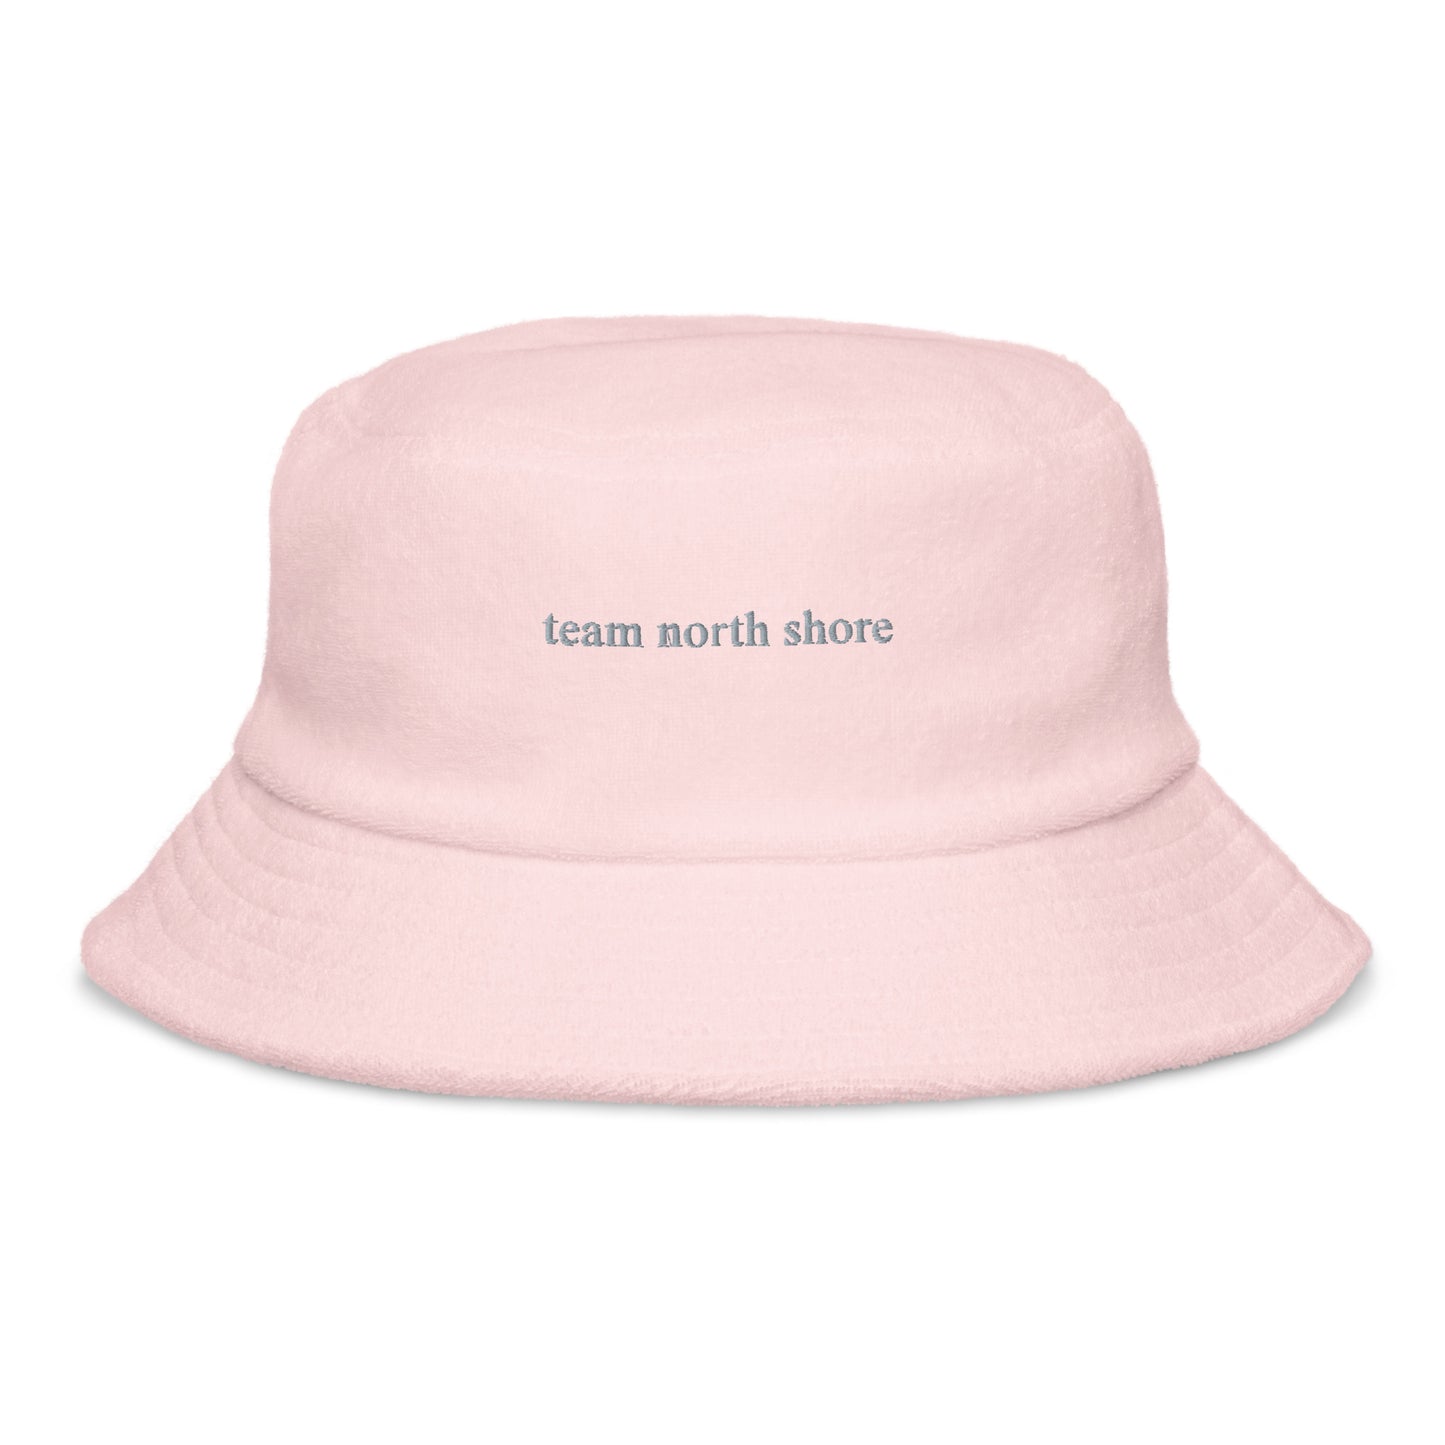 pink bucket hat that says "team north shore" in grey lettering